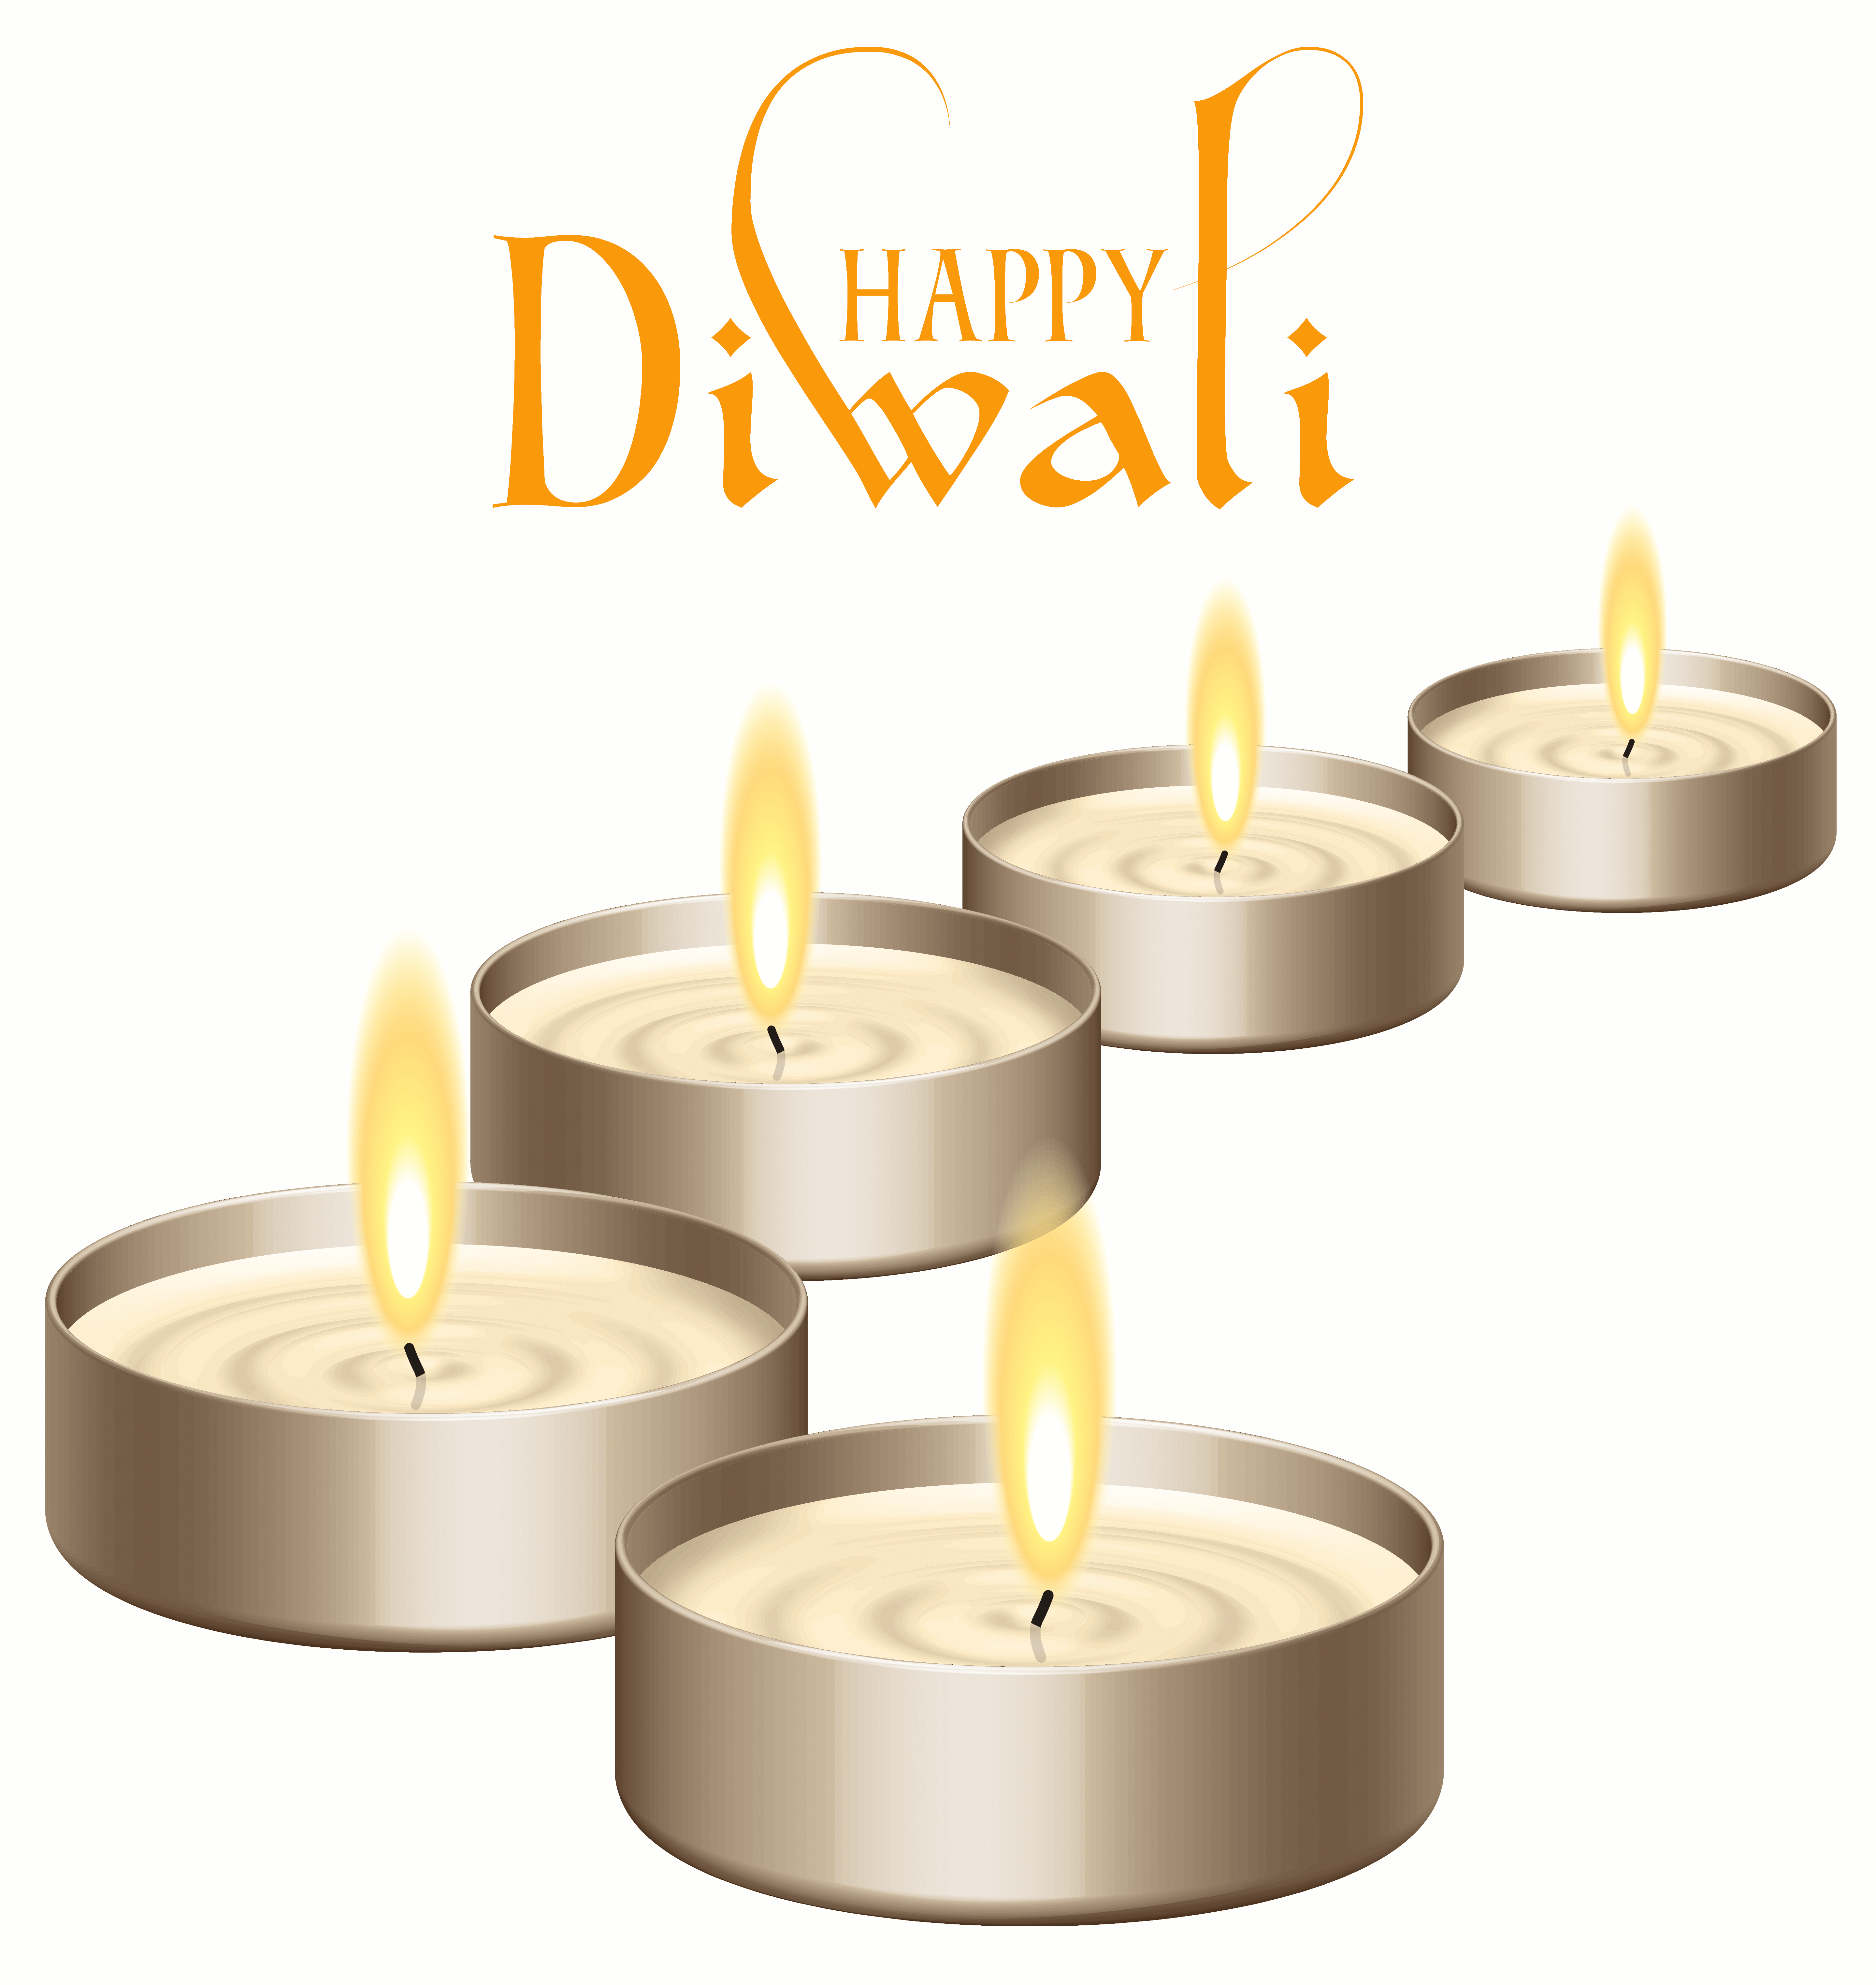 A Group Of Candles With Text